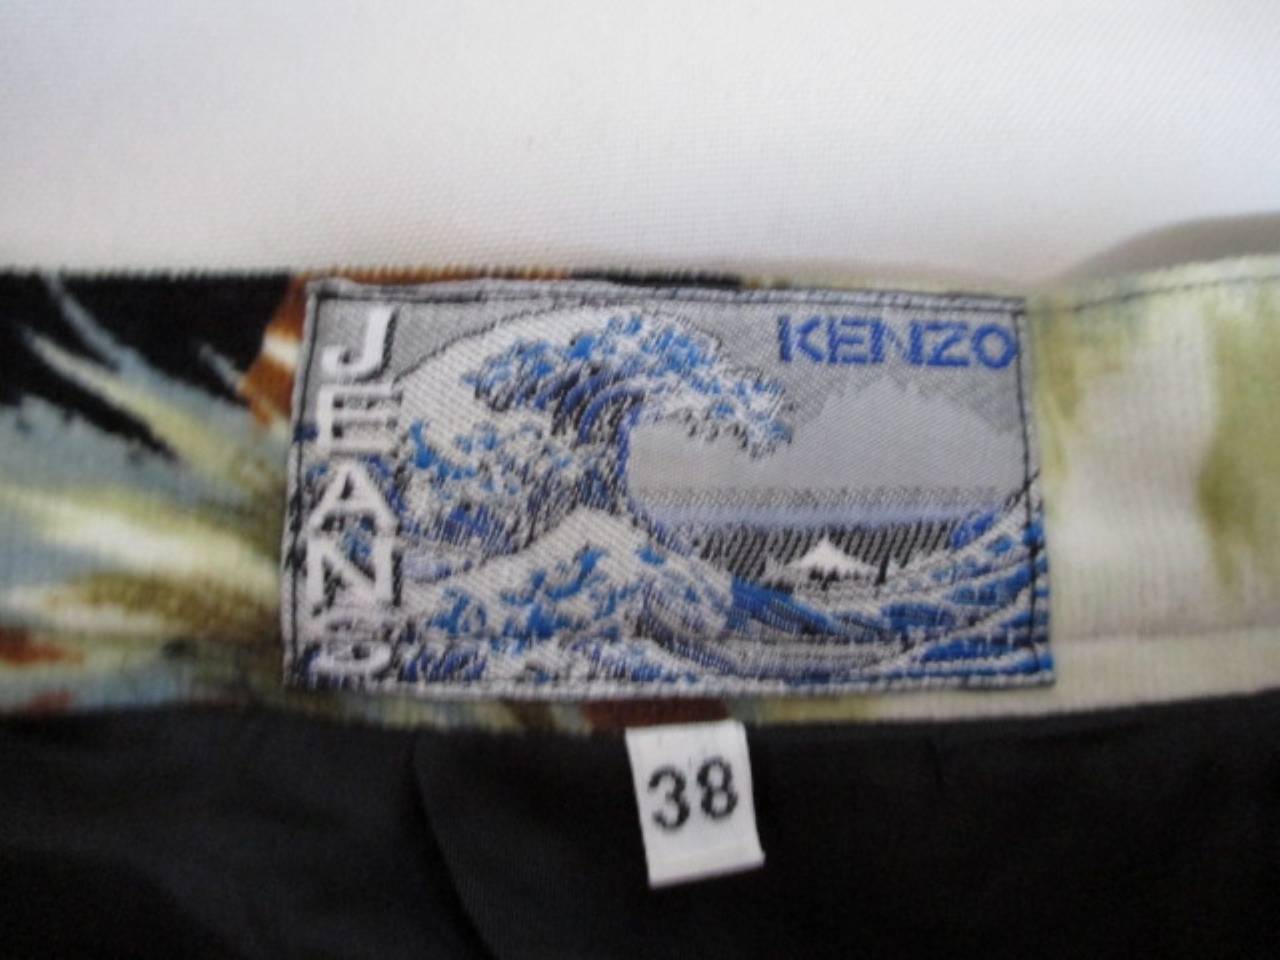 Kenzo jeans wild horses vintage print velvet skirt with a zipper.
Appears to be French 38/small, please refer to the measurements in the description.
we offer more vintage Kenzo items, view our frontstore

Please note that vintage items are not new